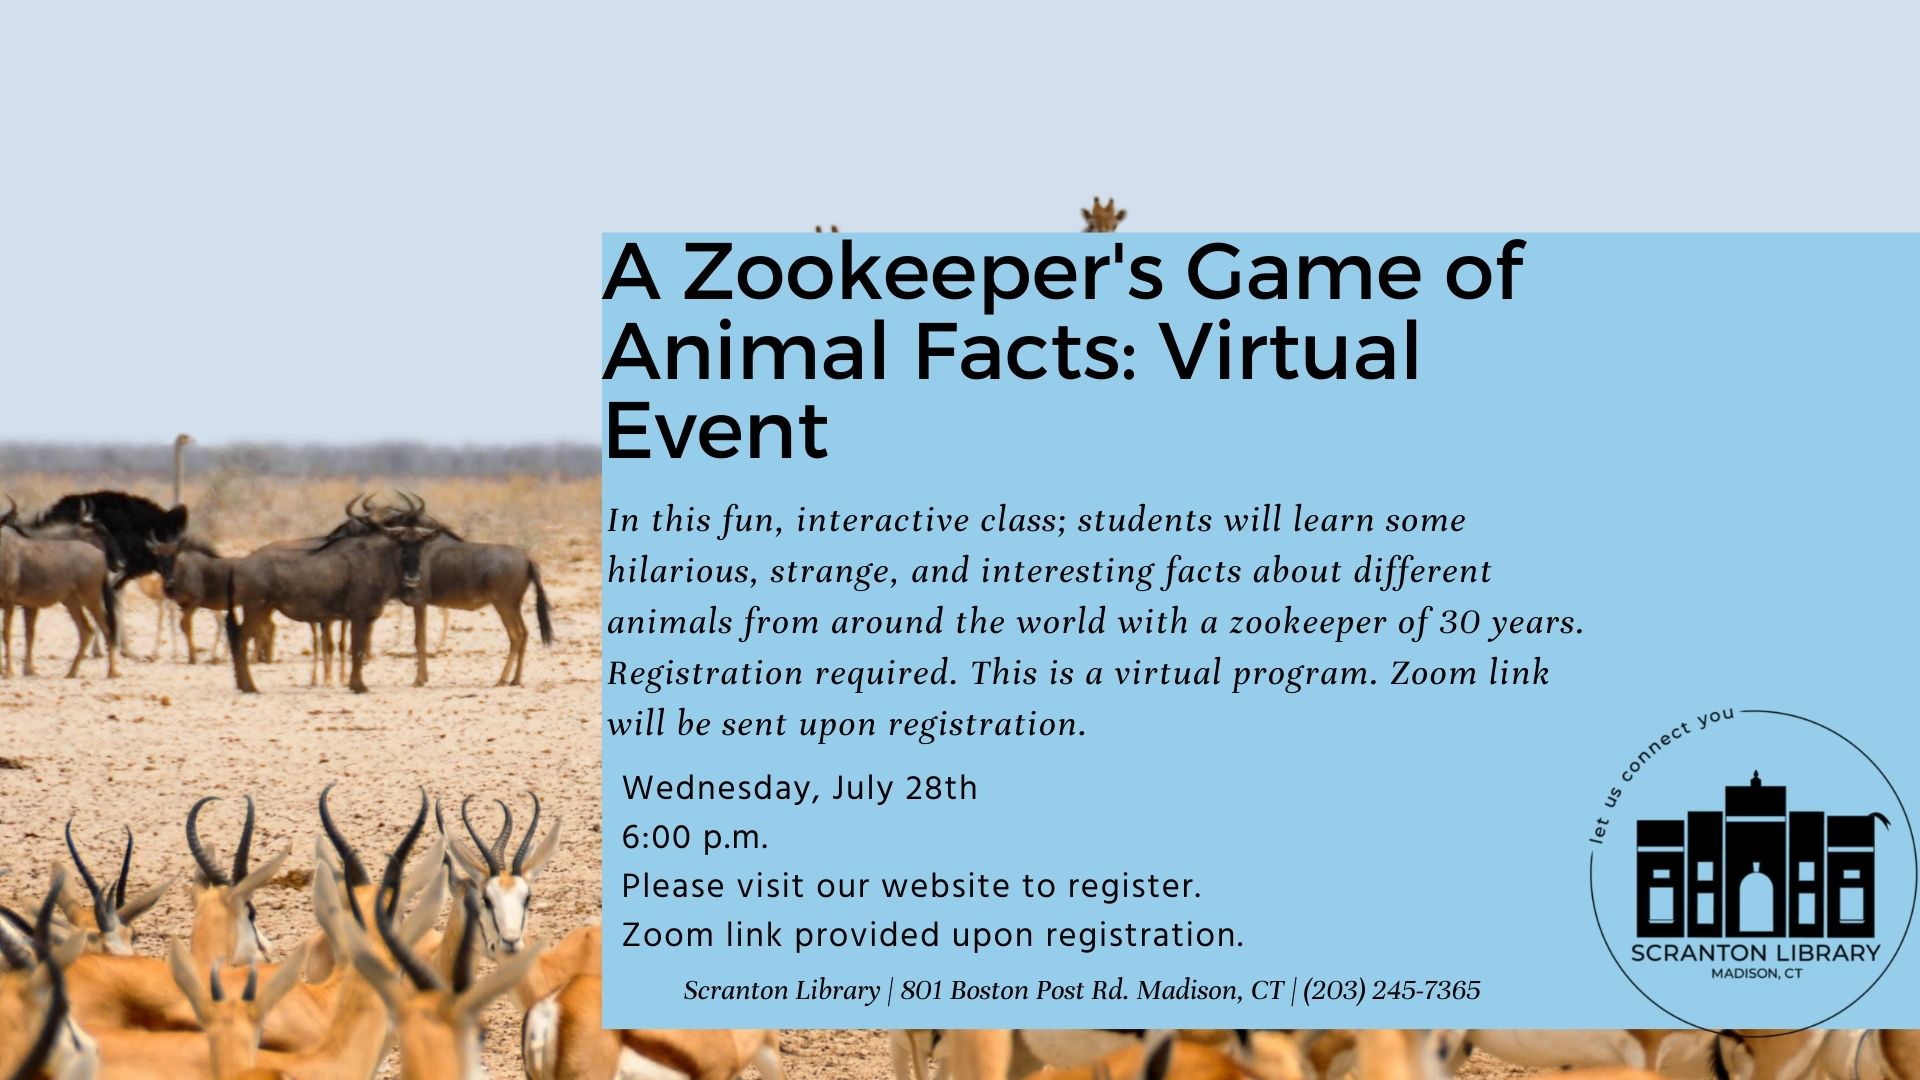 Zookeeper's Game